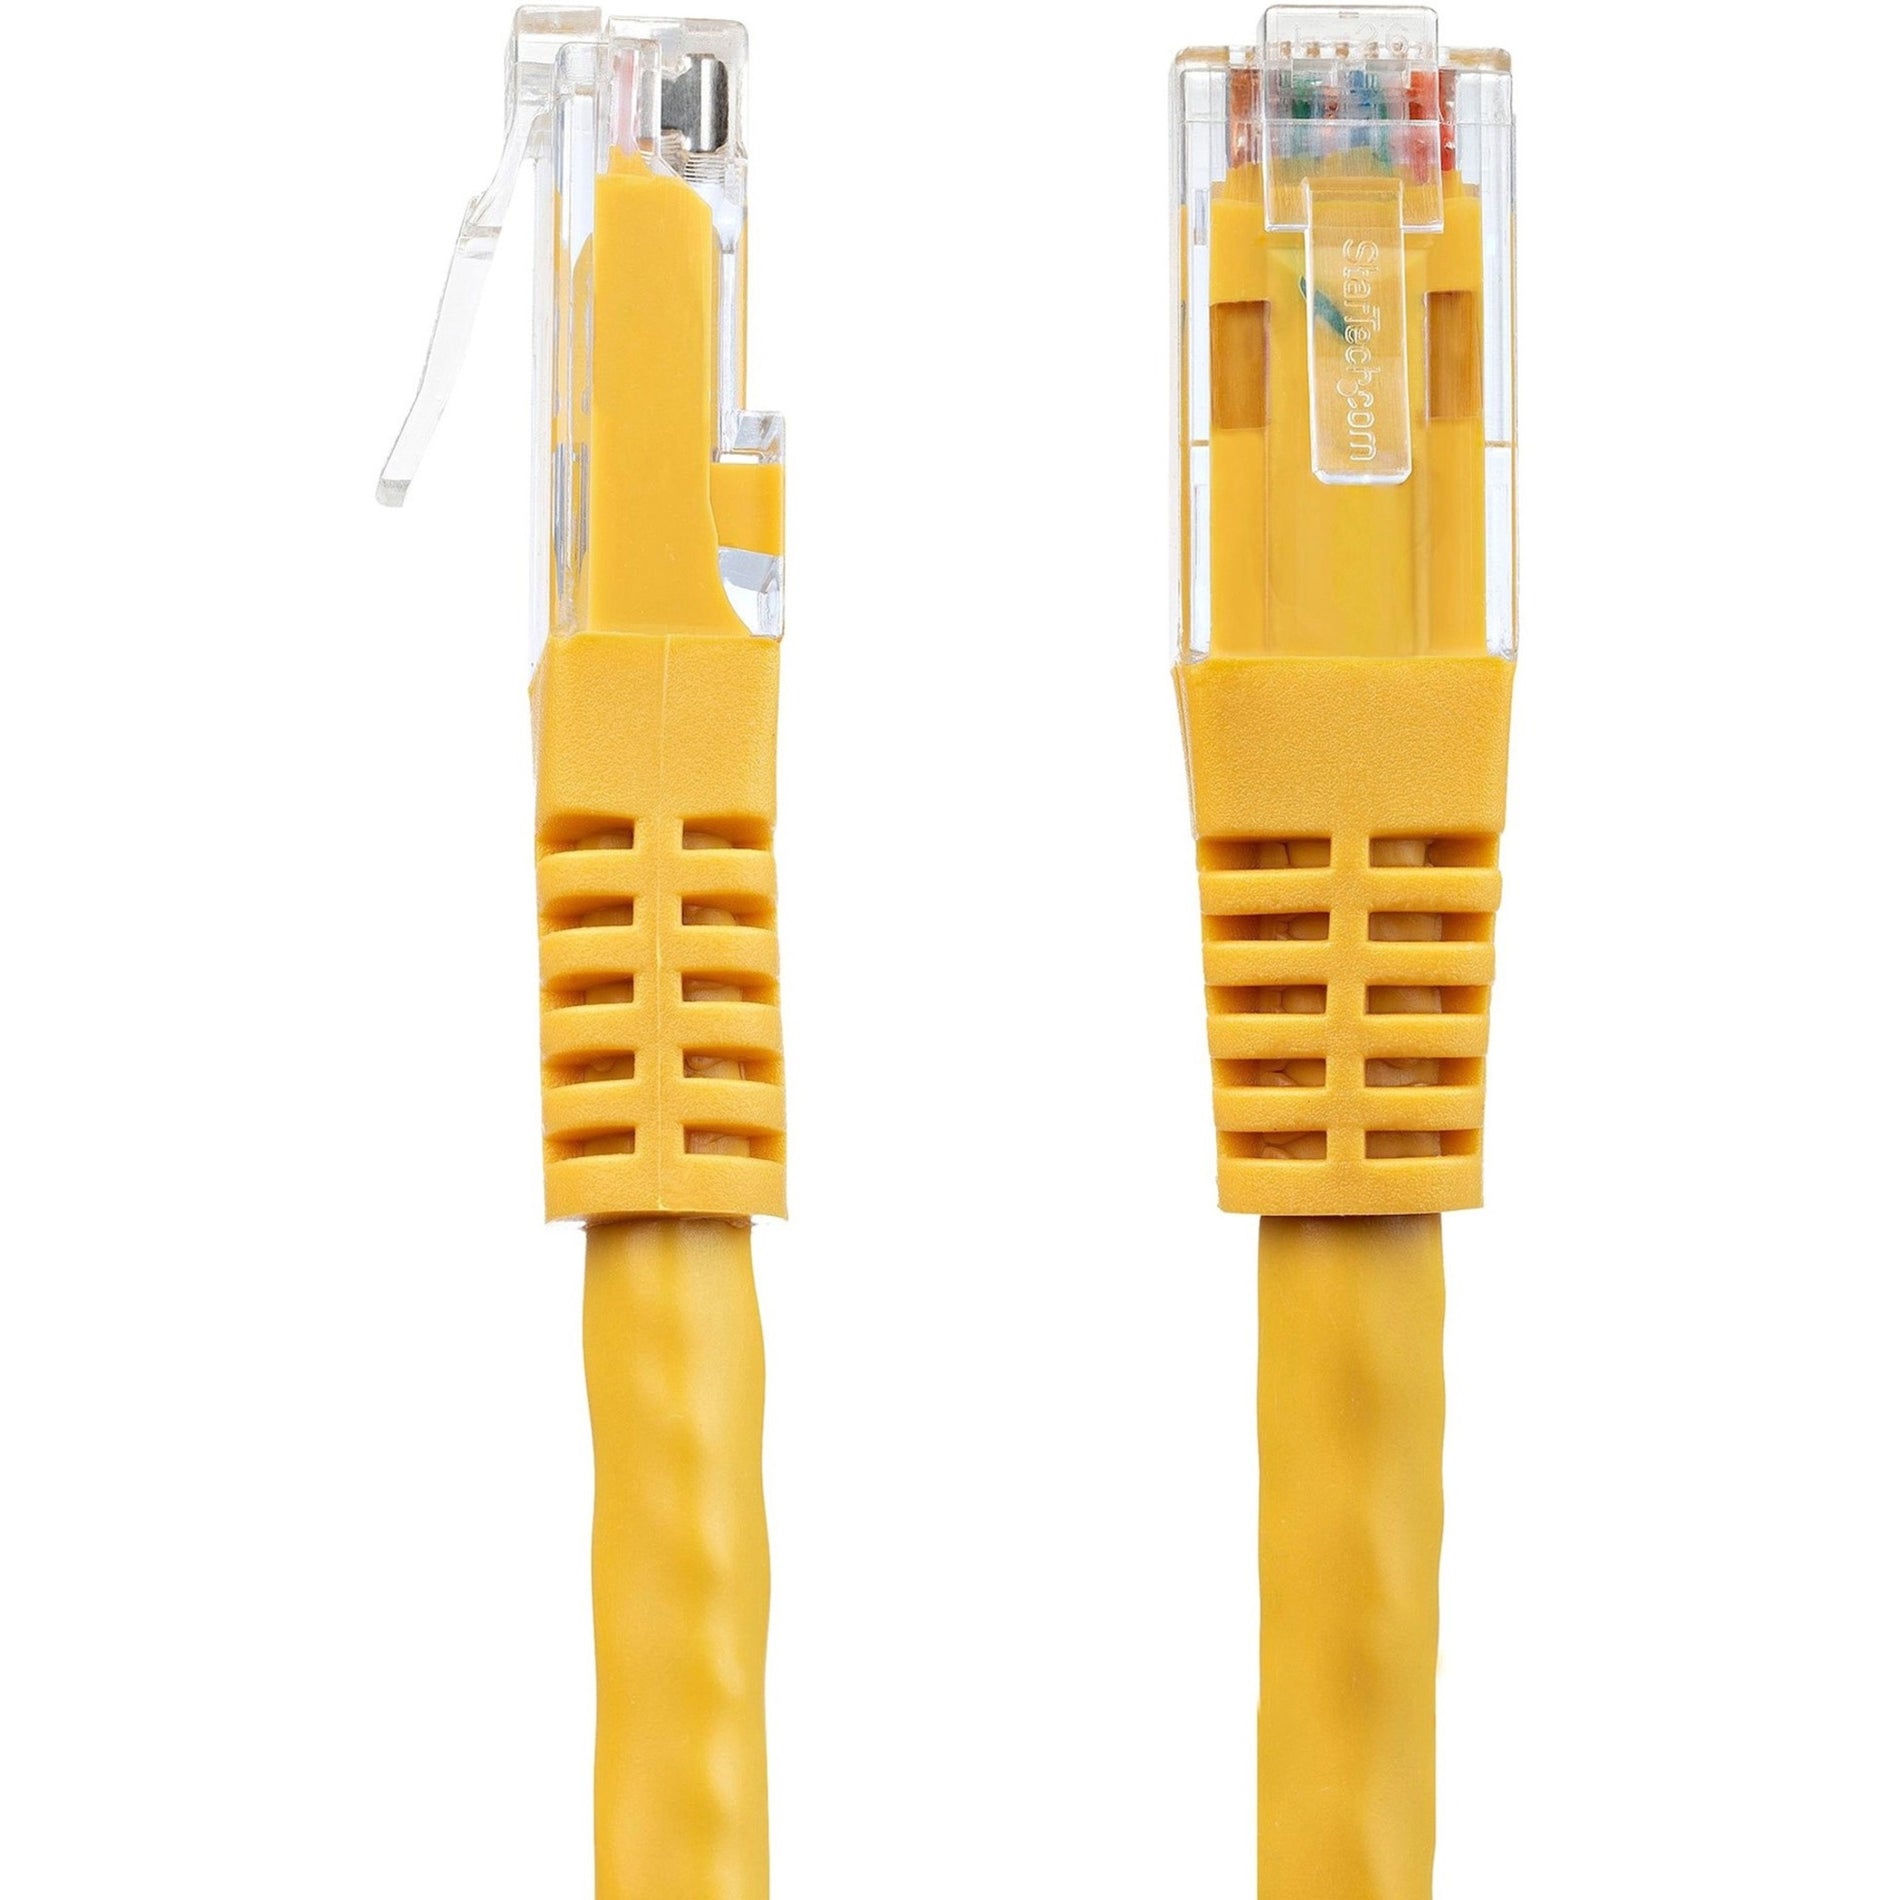 StarTech.com C6PATCH4YL 4ft Yellow Cat6 UTP Patch Cable ETL Verified, 10 Gbit/s Data Transfer Rate, Gold Plated Connectors